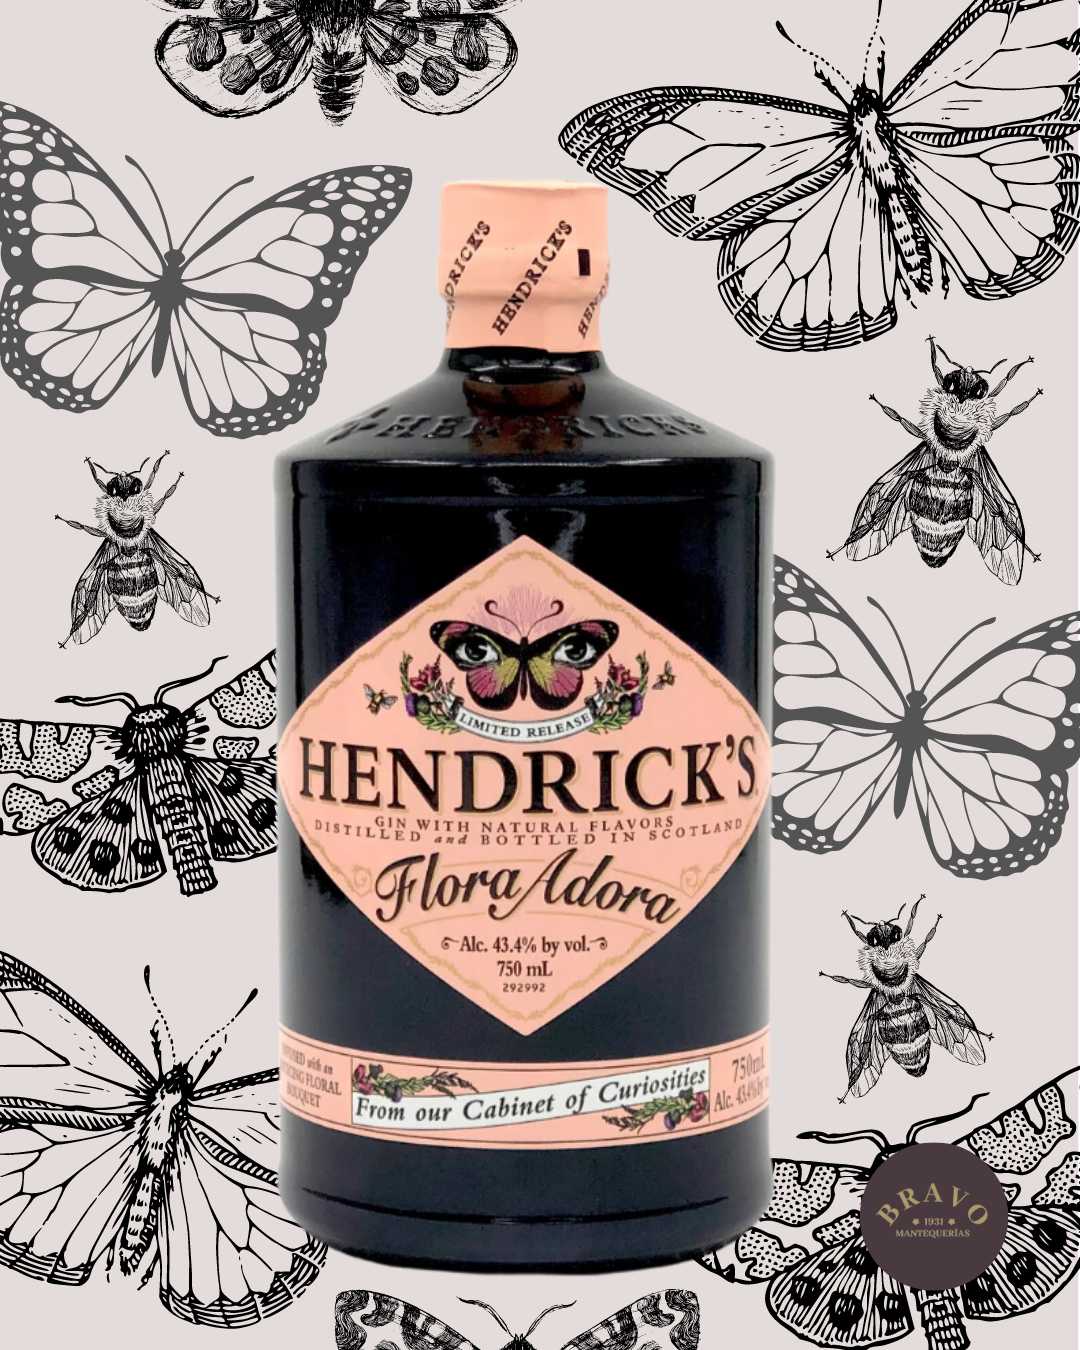 Hendrick's bring the spring to us inside a bottle